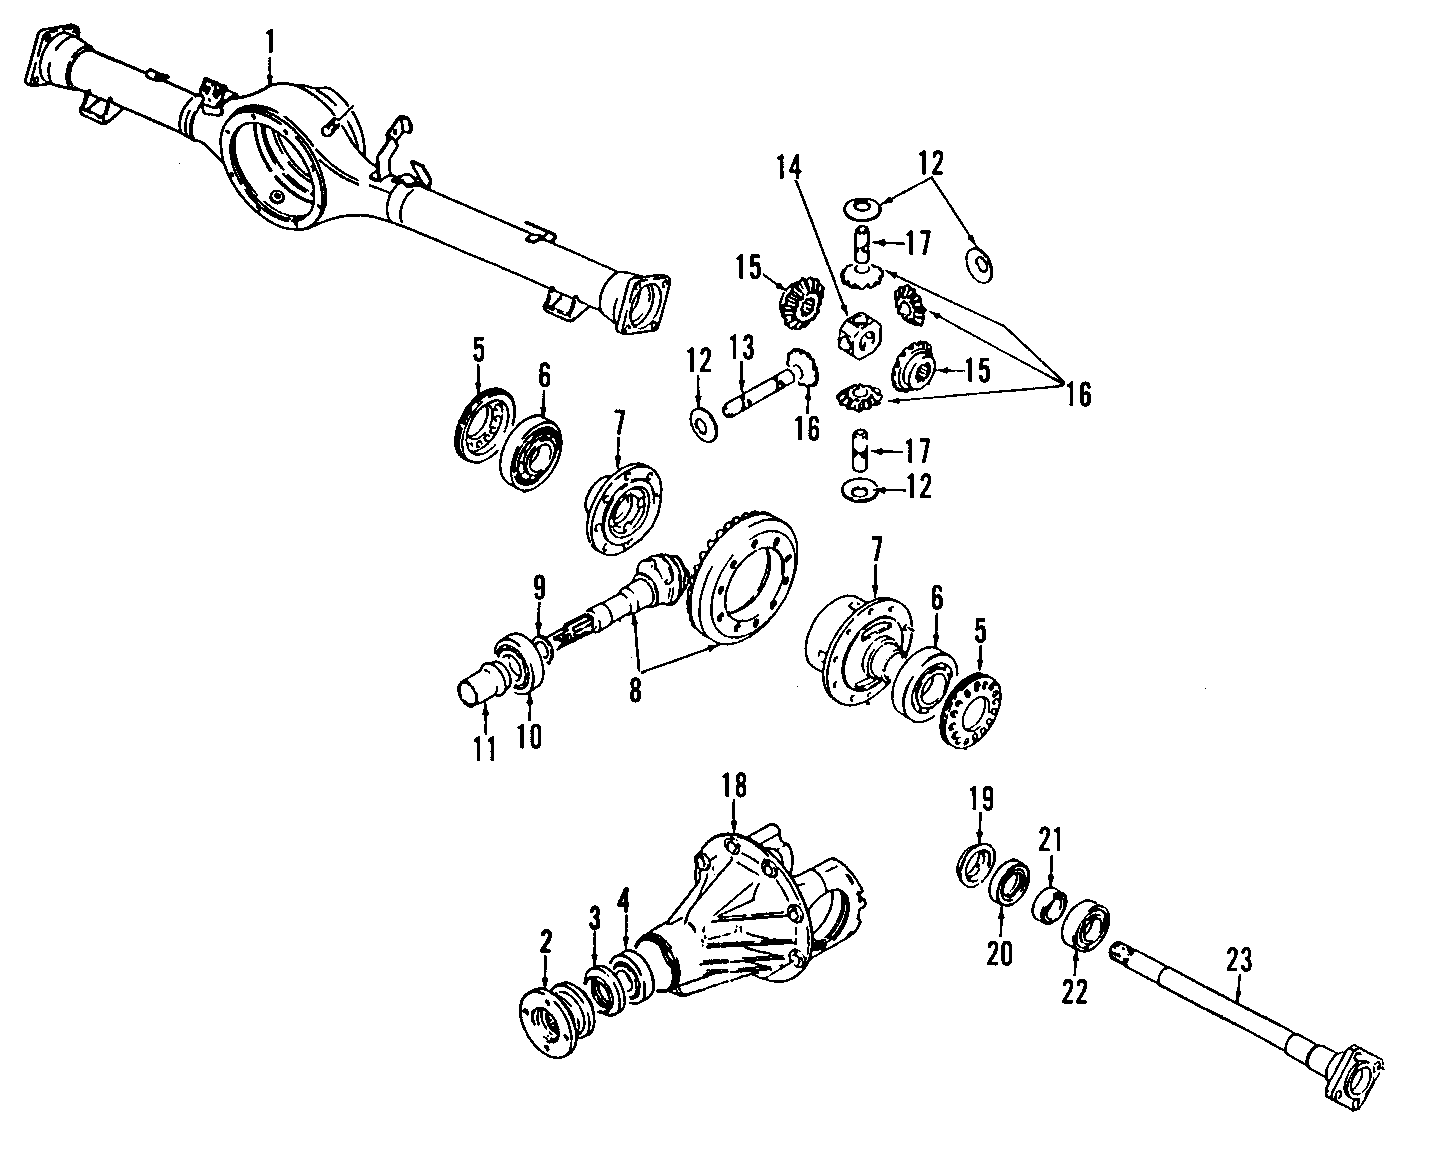 20REAR AXLE. DIFFERENTIAL. PROPELLER SHAFT.https://images.simplepart.com/images/parts/motor/fullsize/T011110.png